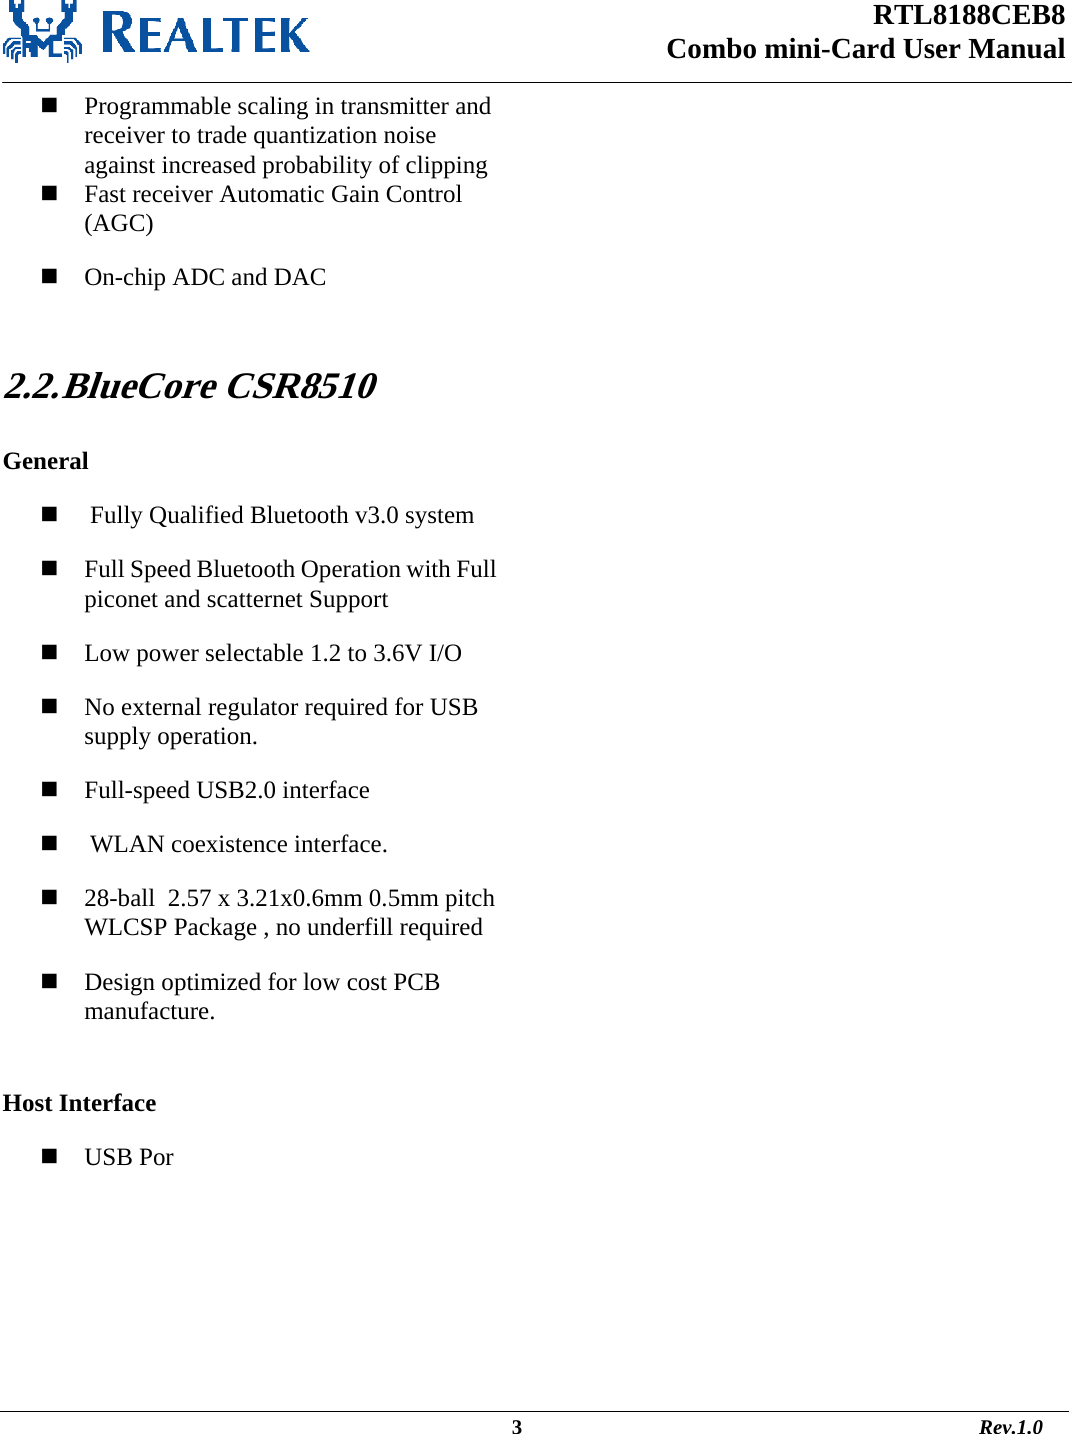 RTL8188CEB8 Combo mini-Card User Manual                                                                                                  3                                                                                       Rev.1.0   Programmable scaling in transmitter and receiver to trade quantization noise against increased probability of clipping  Fast receiver Automatic Gain Control (AGC)  On-chip ADC and DAC  2.2. BlueCore  CSR8510  General   Fully Qualified Bluetooth v3.0 system  Full Speed Bluetooth Operation with Full piconet and scatternet Support  Low power selectable 1.2 to 3.6V I/O  No external regulator required for USB supply operation.  Full-speed USB2.0 interface   WLAN coexistence interface.  28-ball  2.57 x 3.21x0.6mm 0.5mm pitch WLCSP Package , no underfill required  Design optimized for low cost PCB manufacture.  Host Interface  USB Por